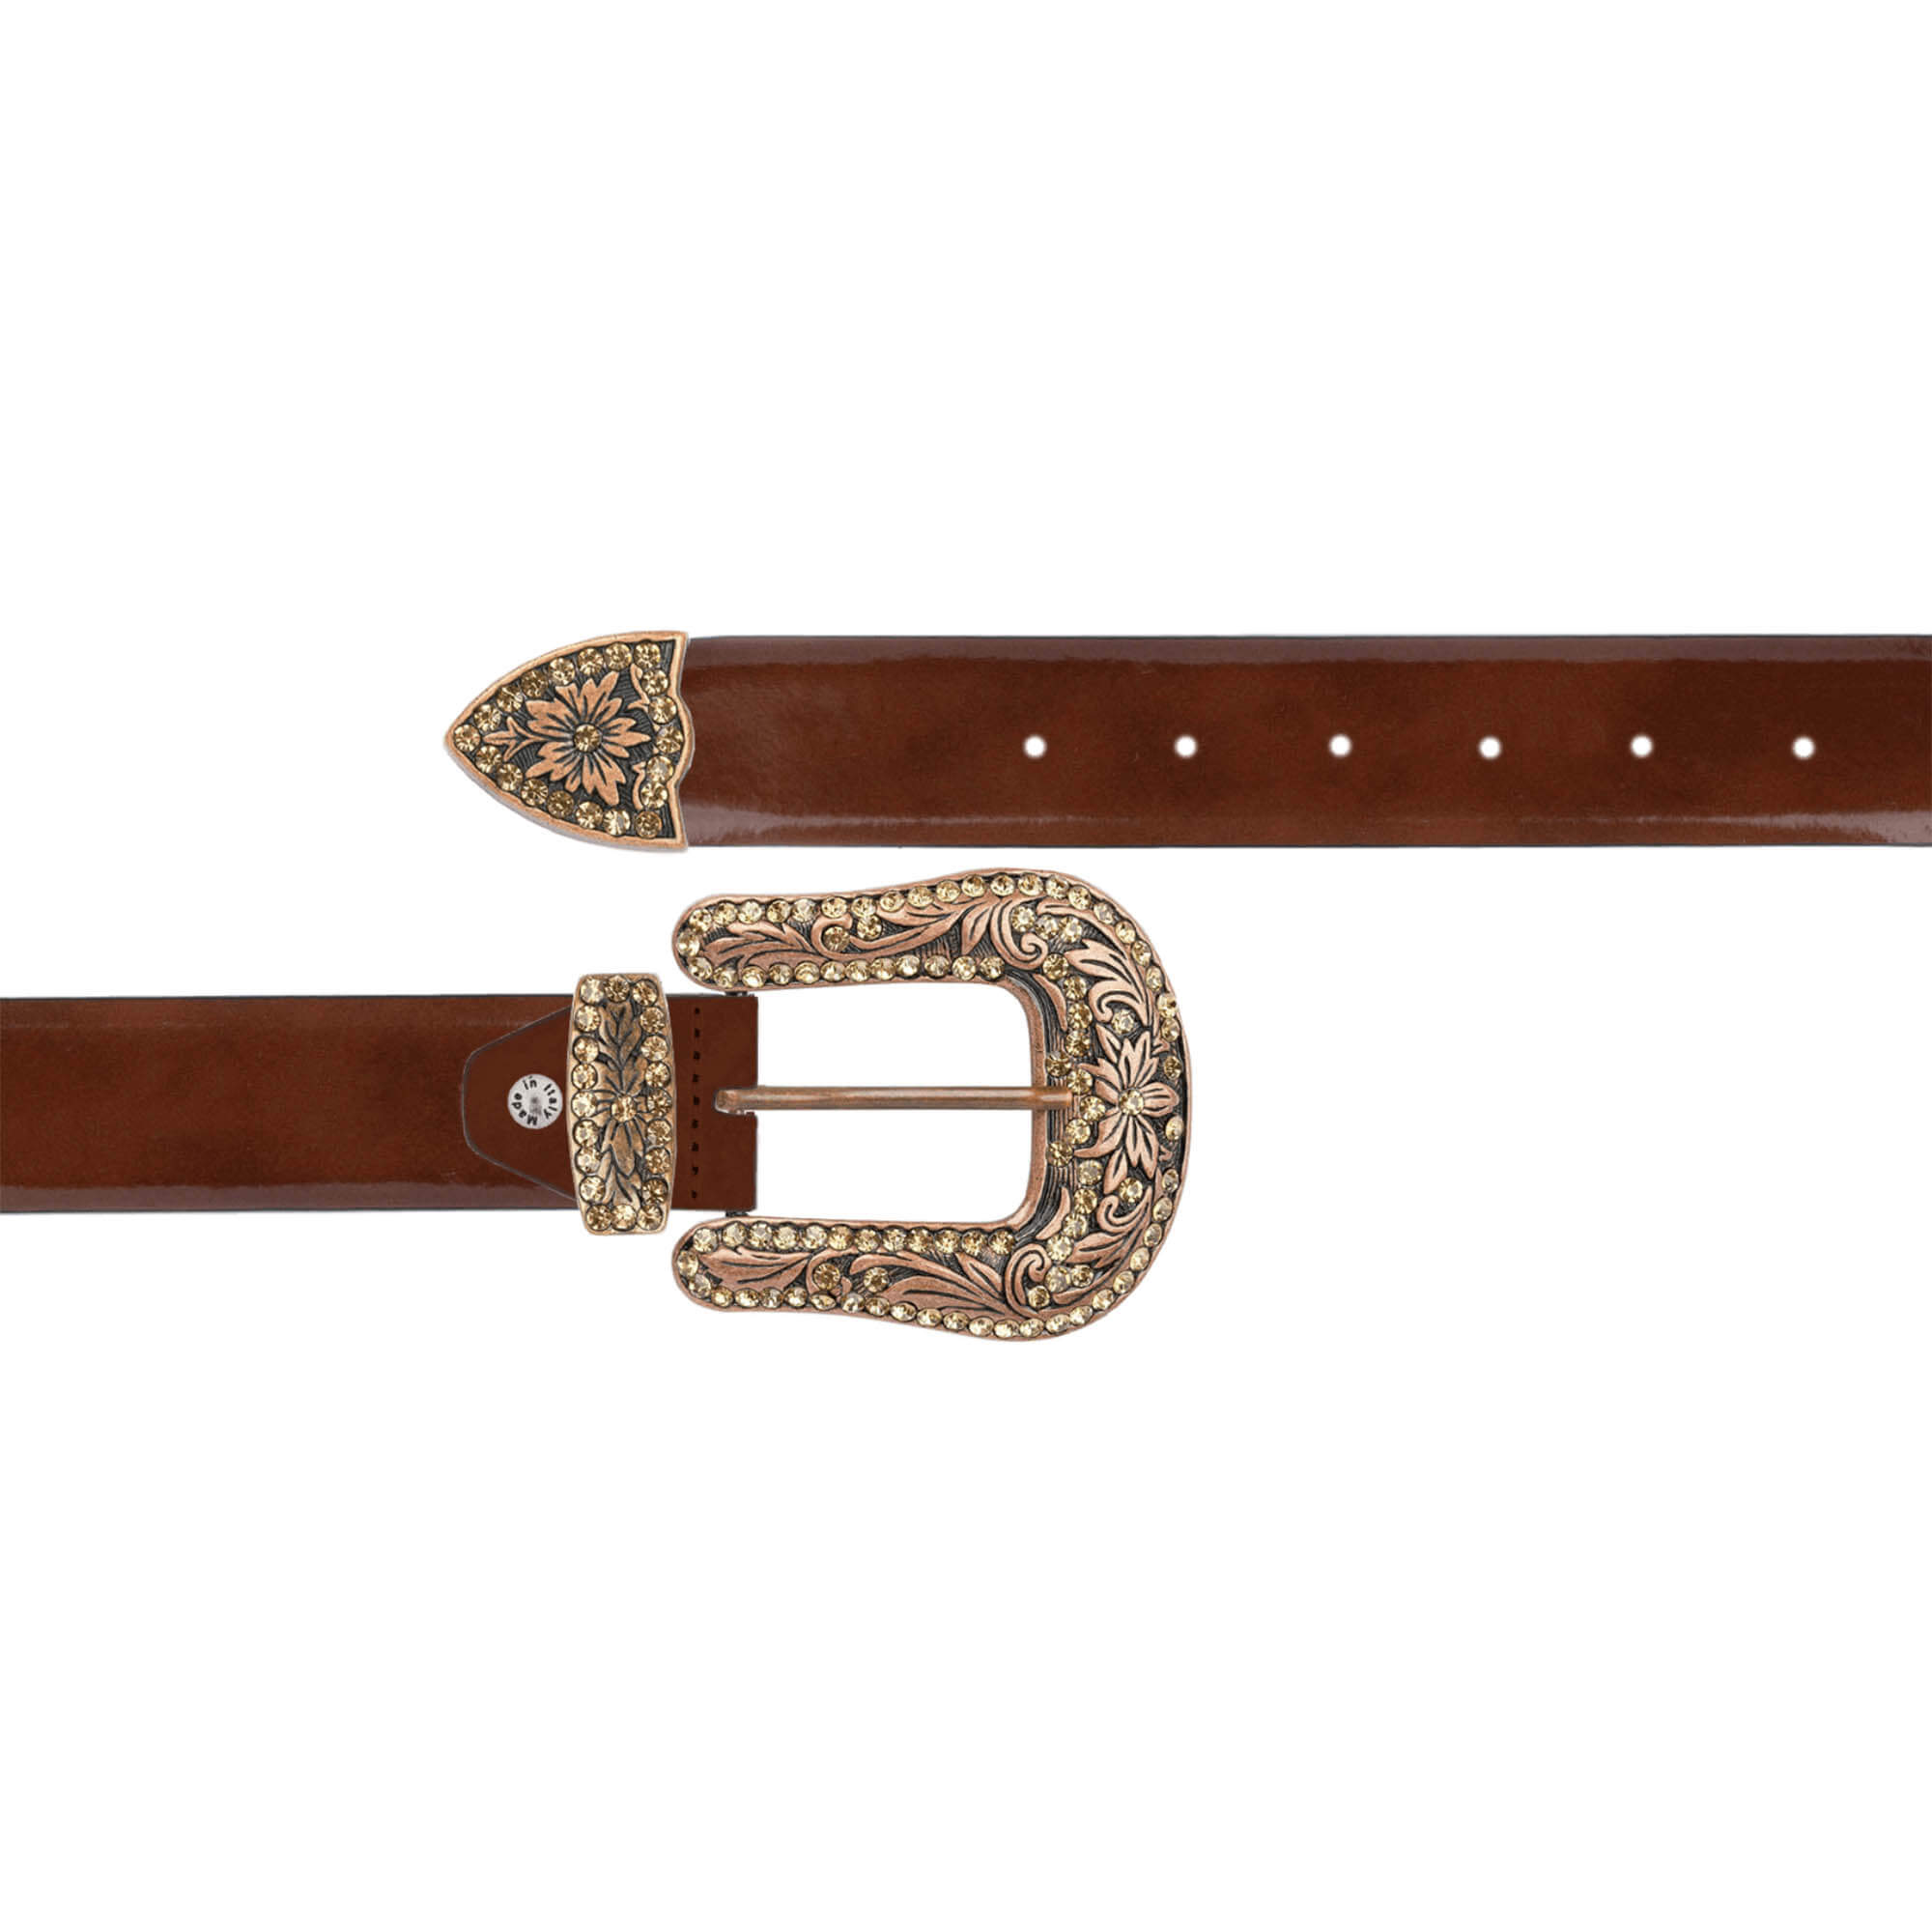 Women's Brown Patent Leather Belt with Copper Rhinestone Buckle 34 / 85 cm - Brown | Capo Pelle